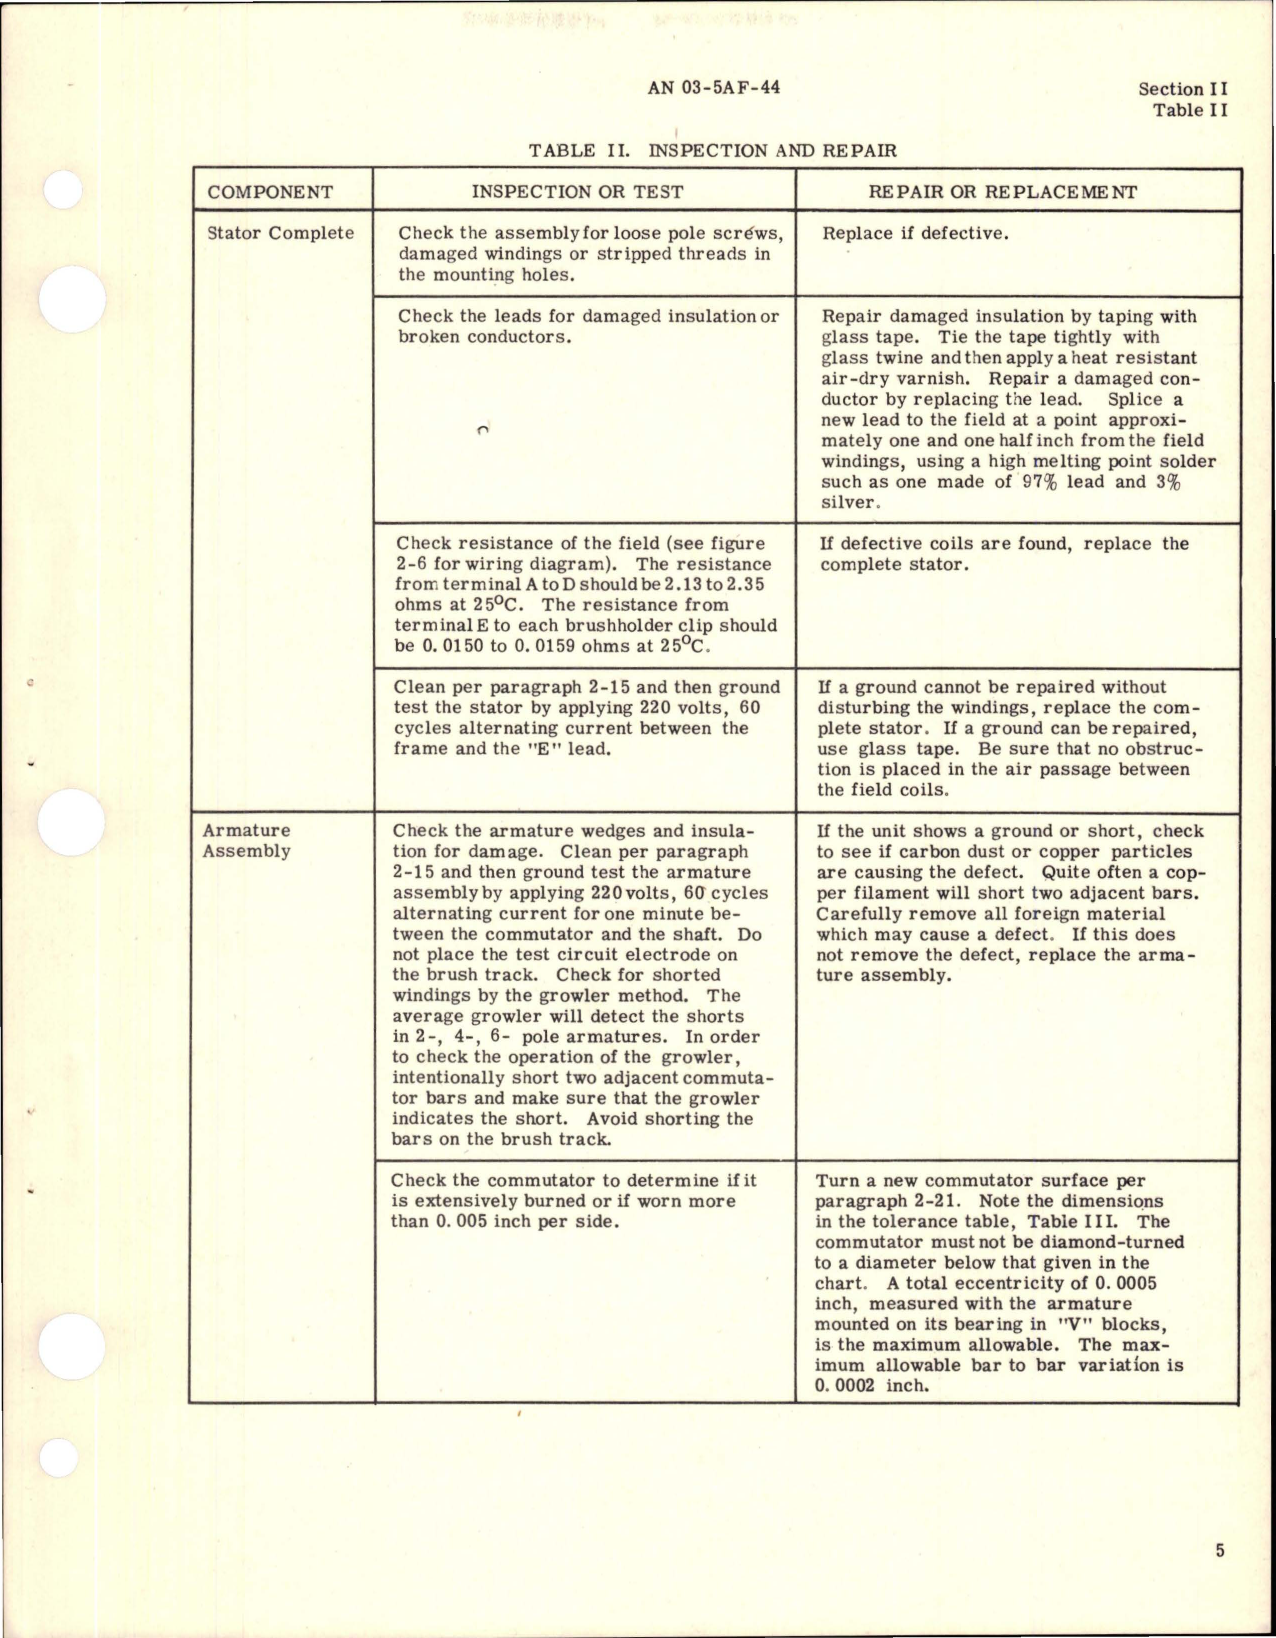 Sample page 7 from AirCorps Library document: Overhaul Instructions for DC-30 Generator - Part A19A6161